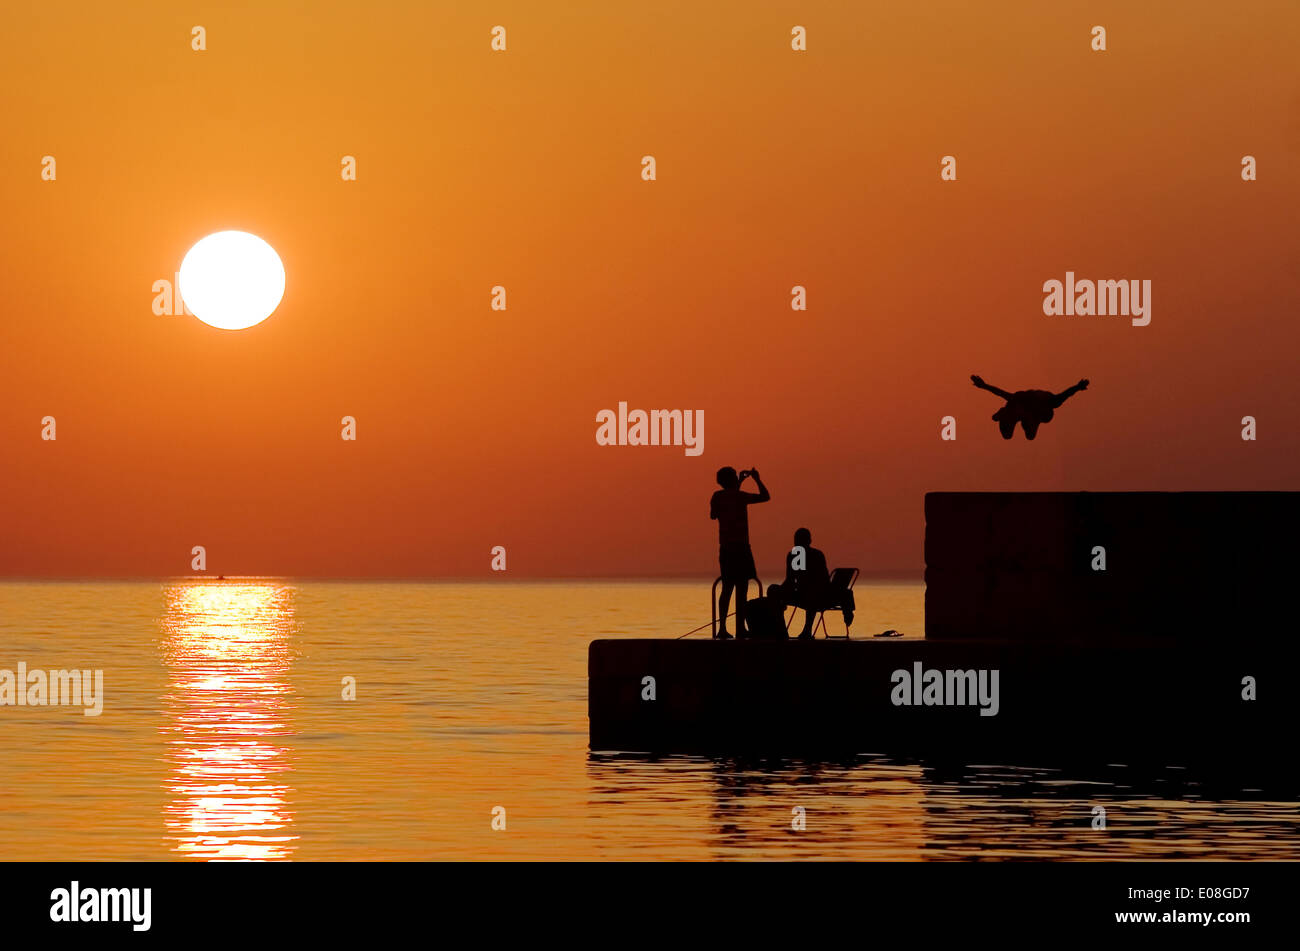 People on the waterfront at sunset, Adriatic Sea, Croatia Stock Photo